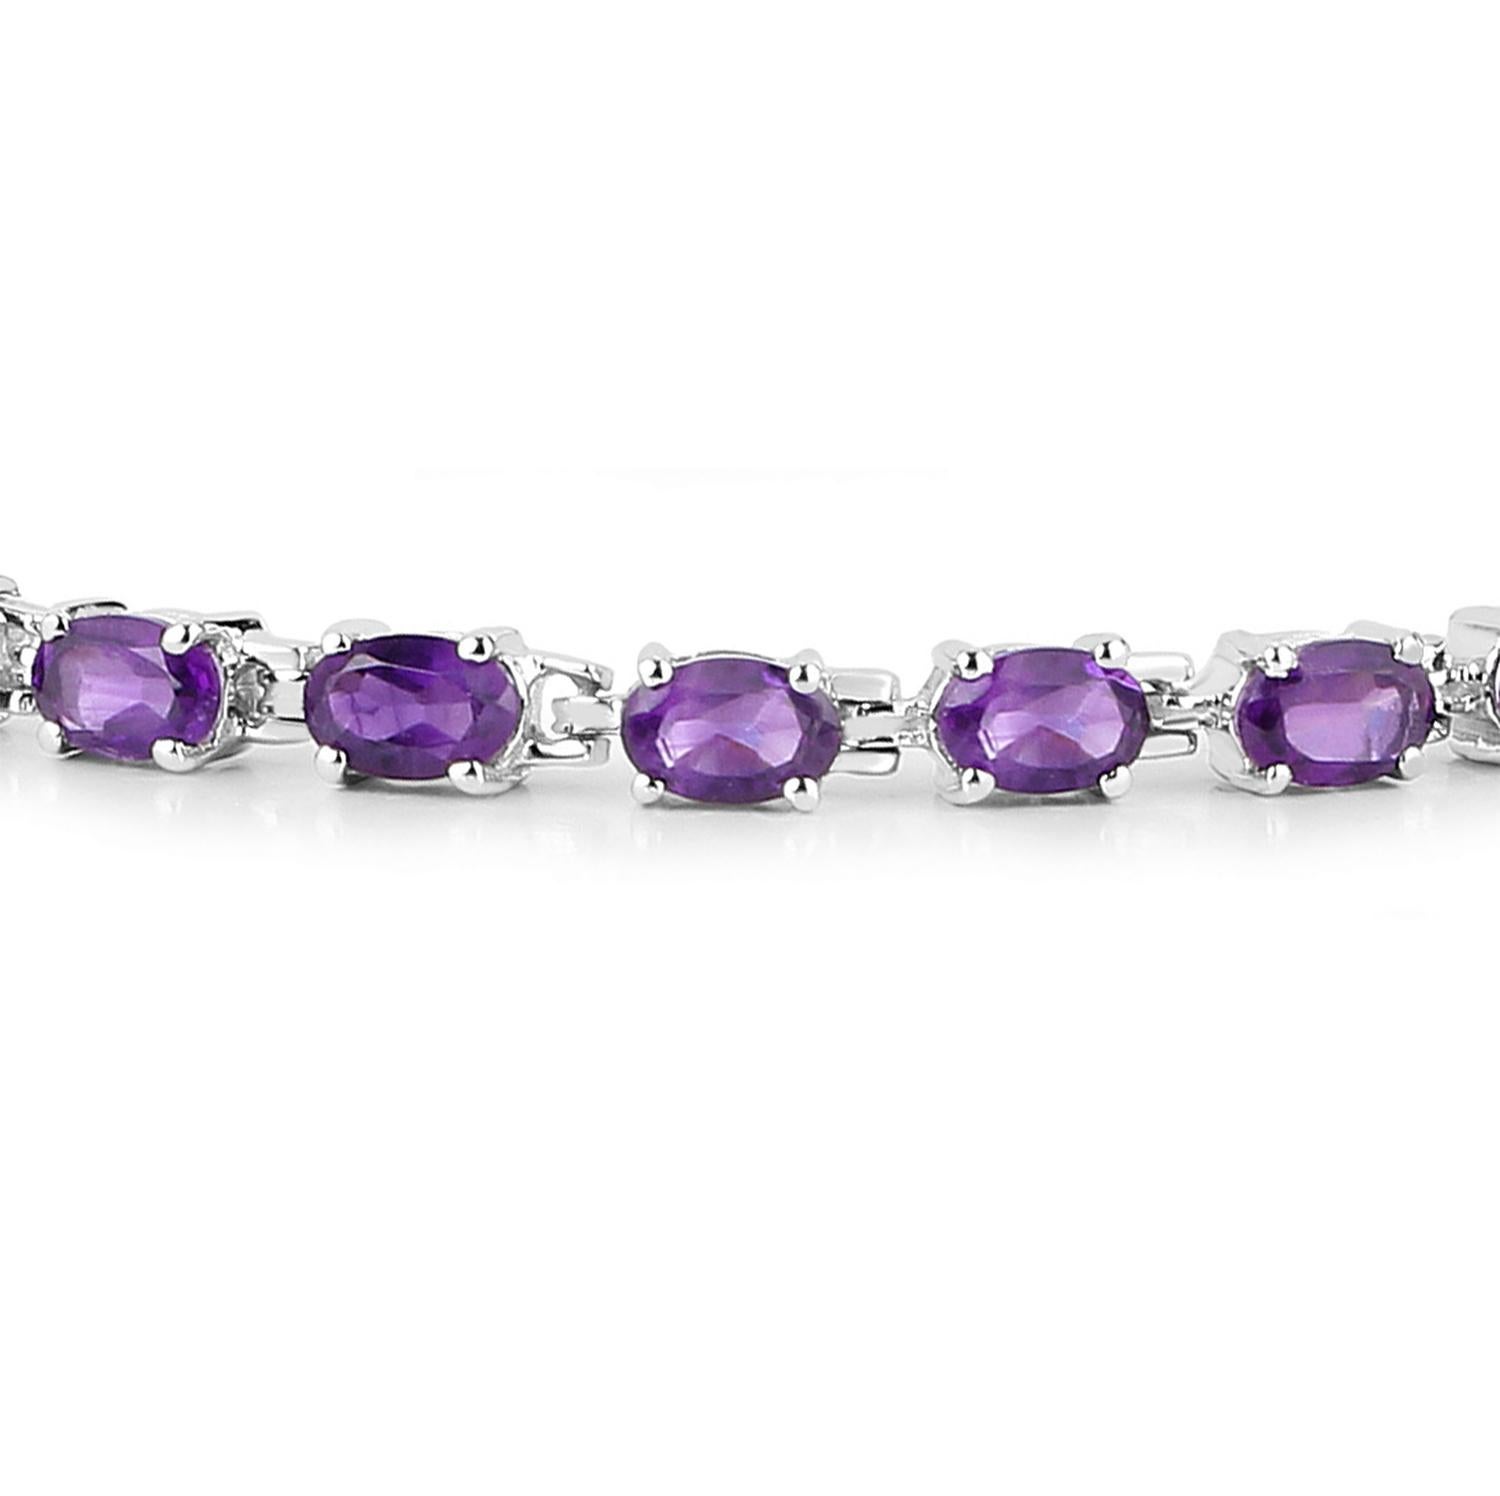 Contemporary Amethyst Tennis Bracelet 7.98 Carats Rhodium Plated Sterling Silver For Sale